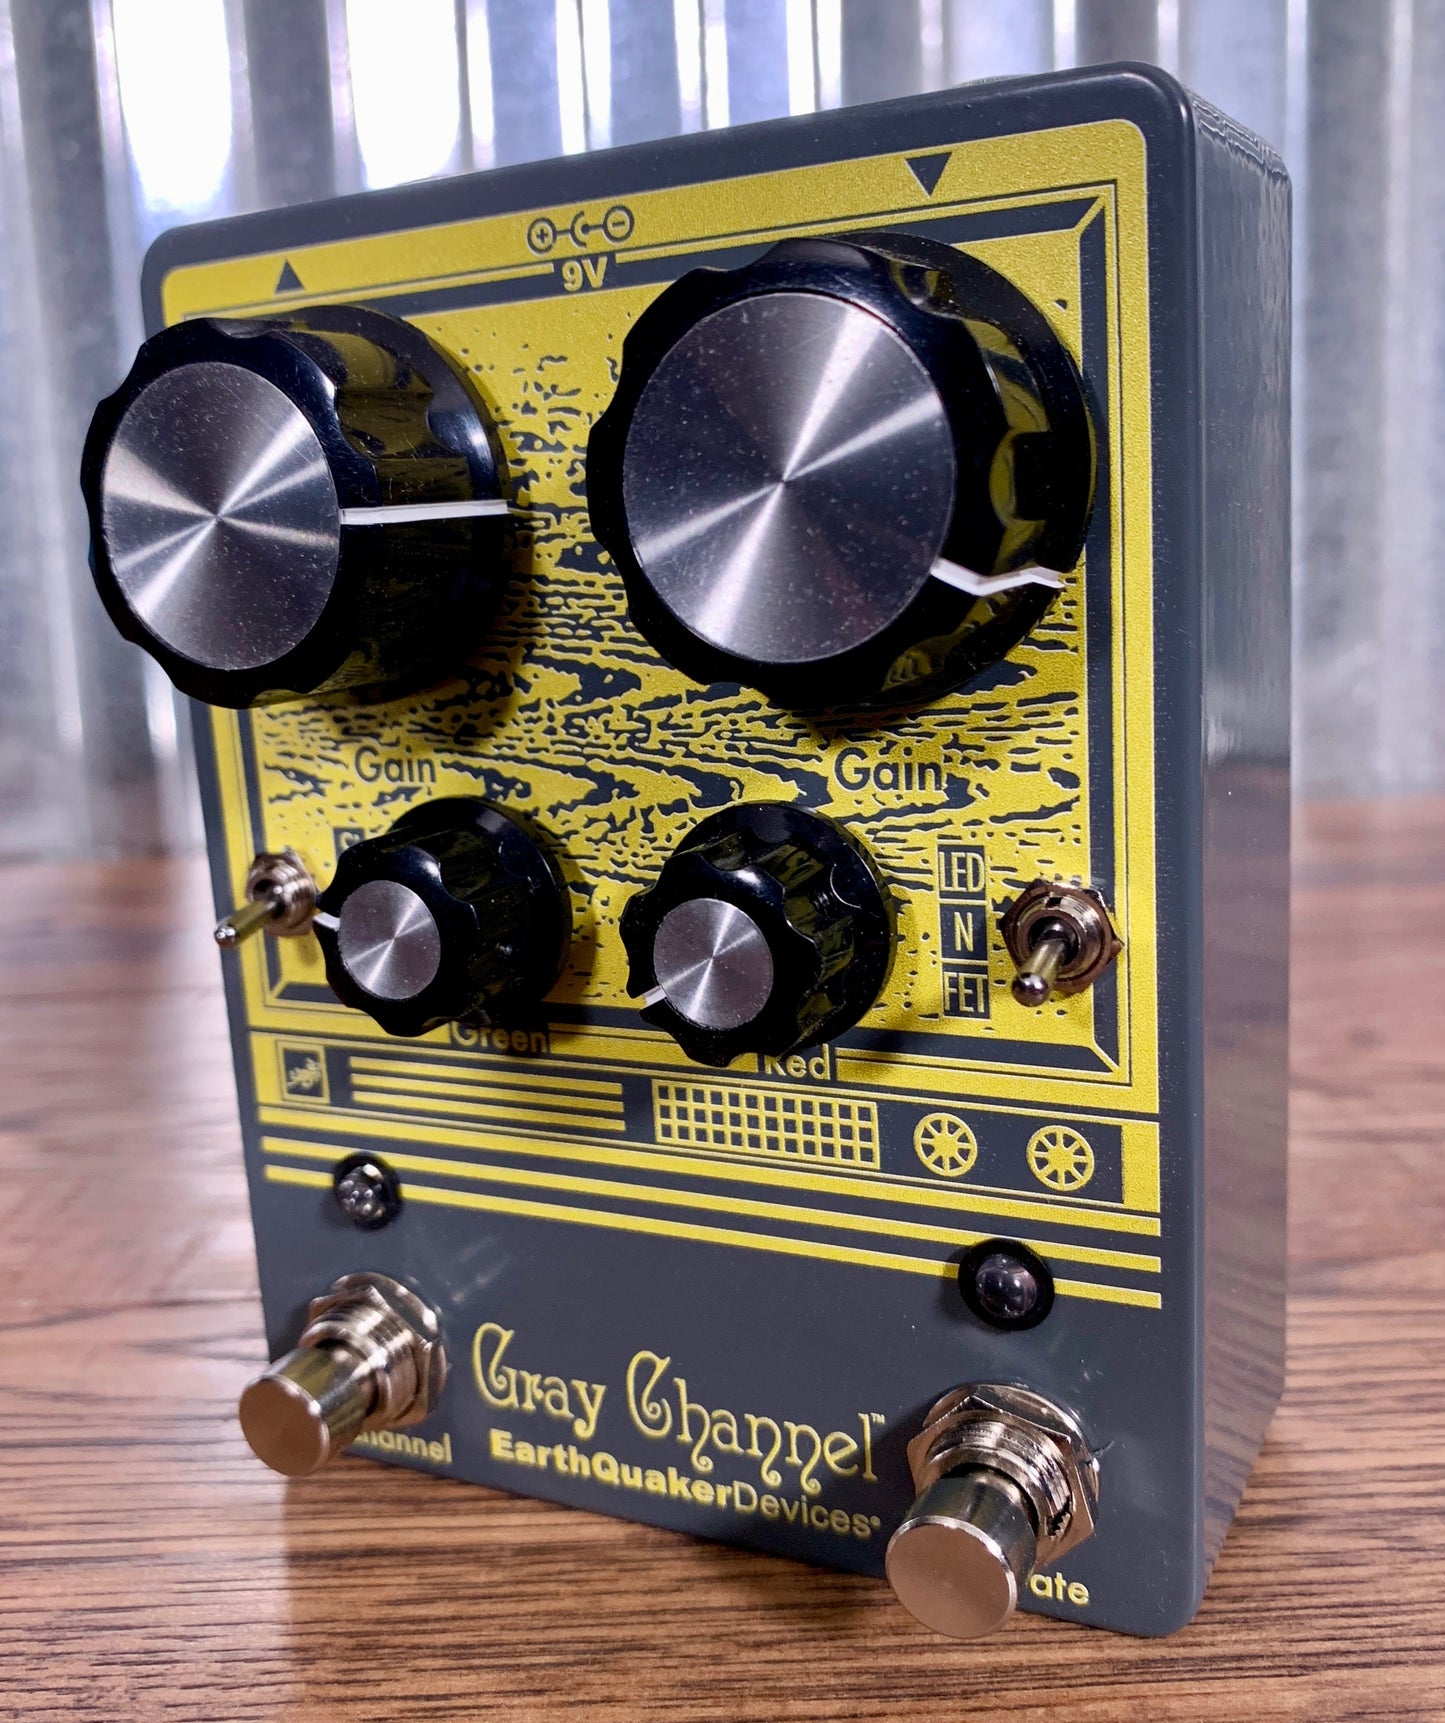 Earthquaker Devices EQD Gray Channel Dynamic Dirt Doubler Guitar Effect Pedal